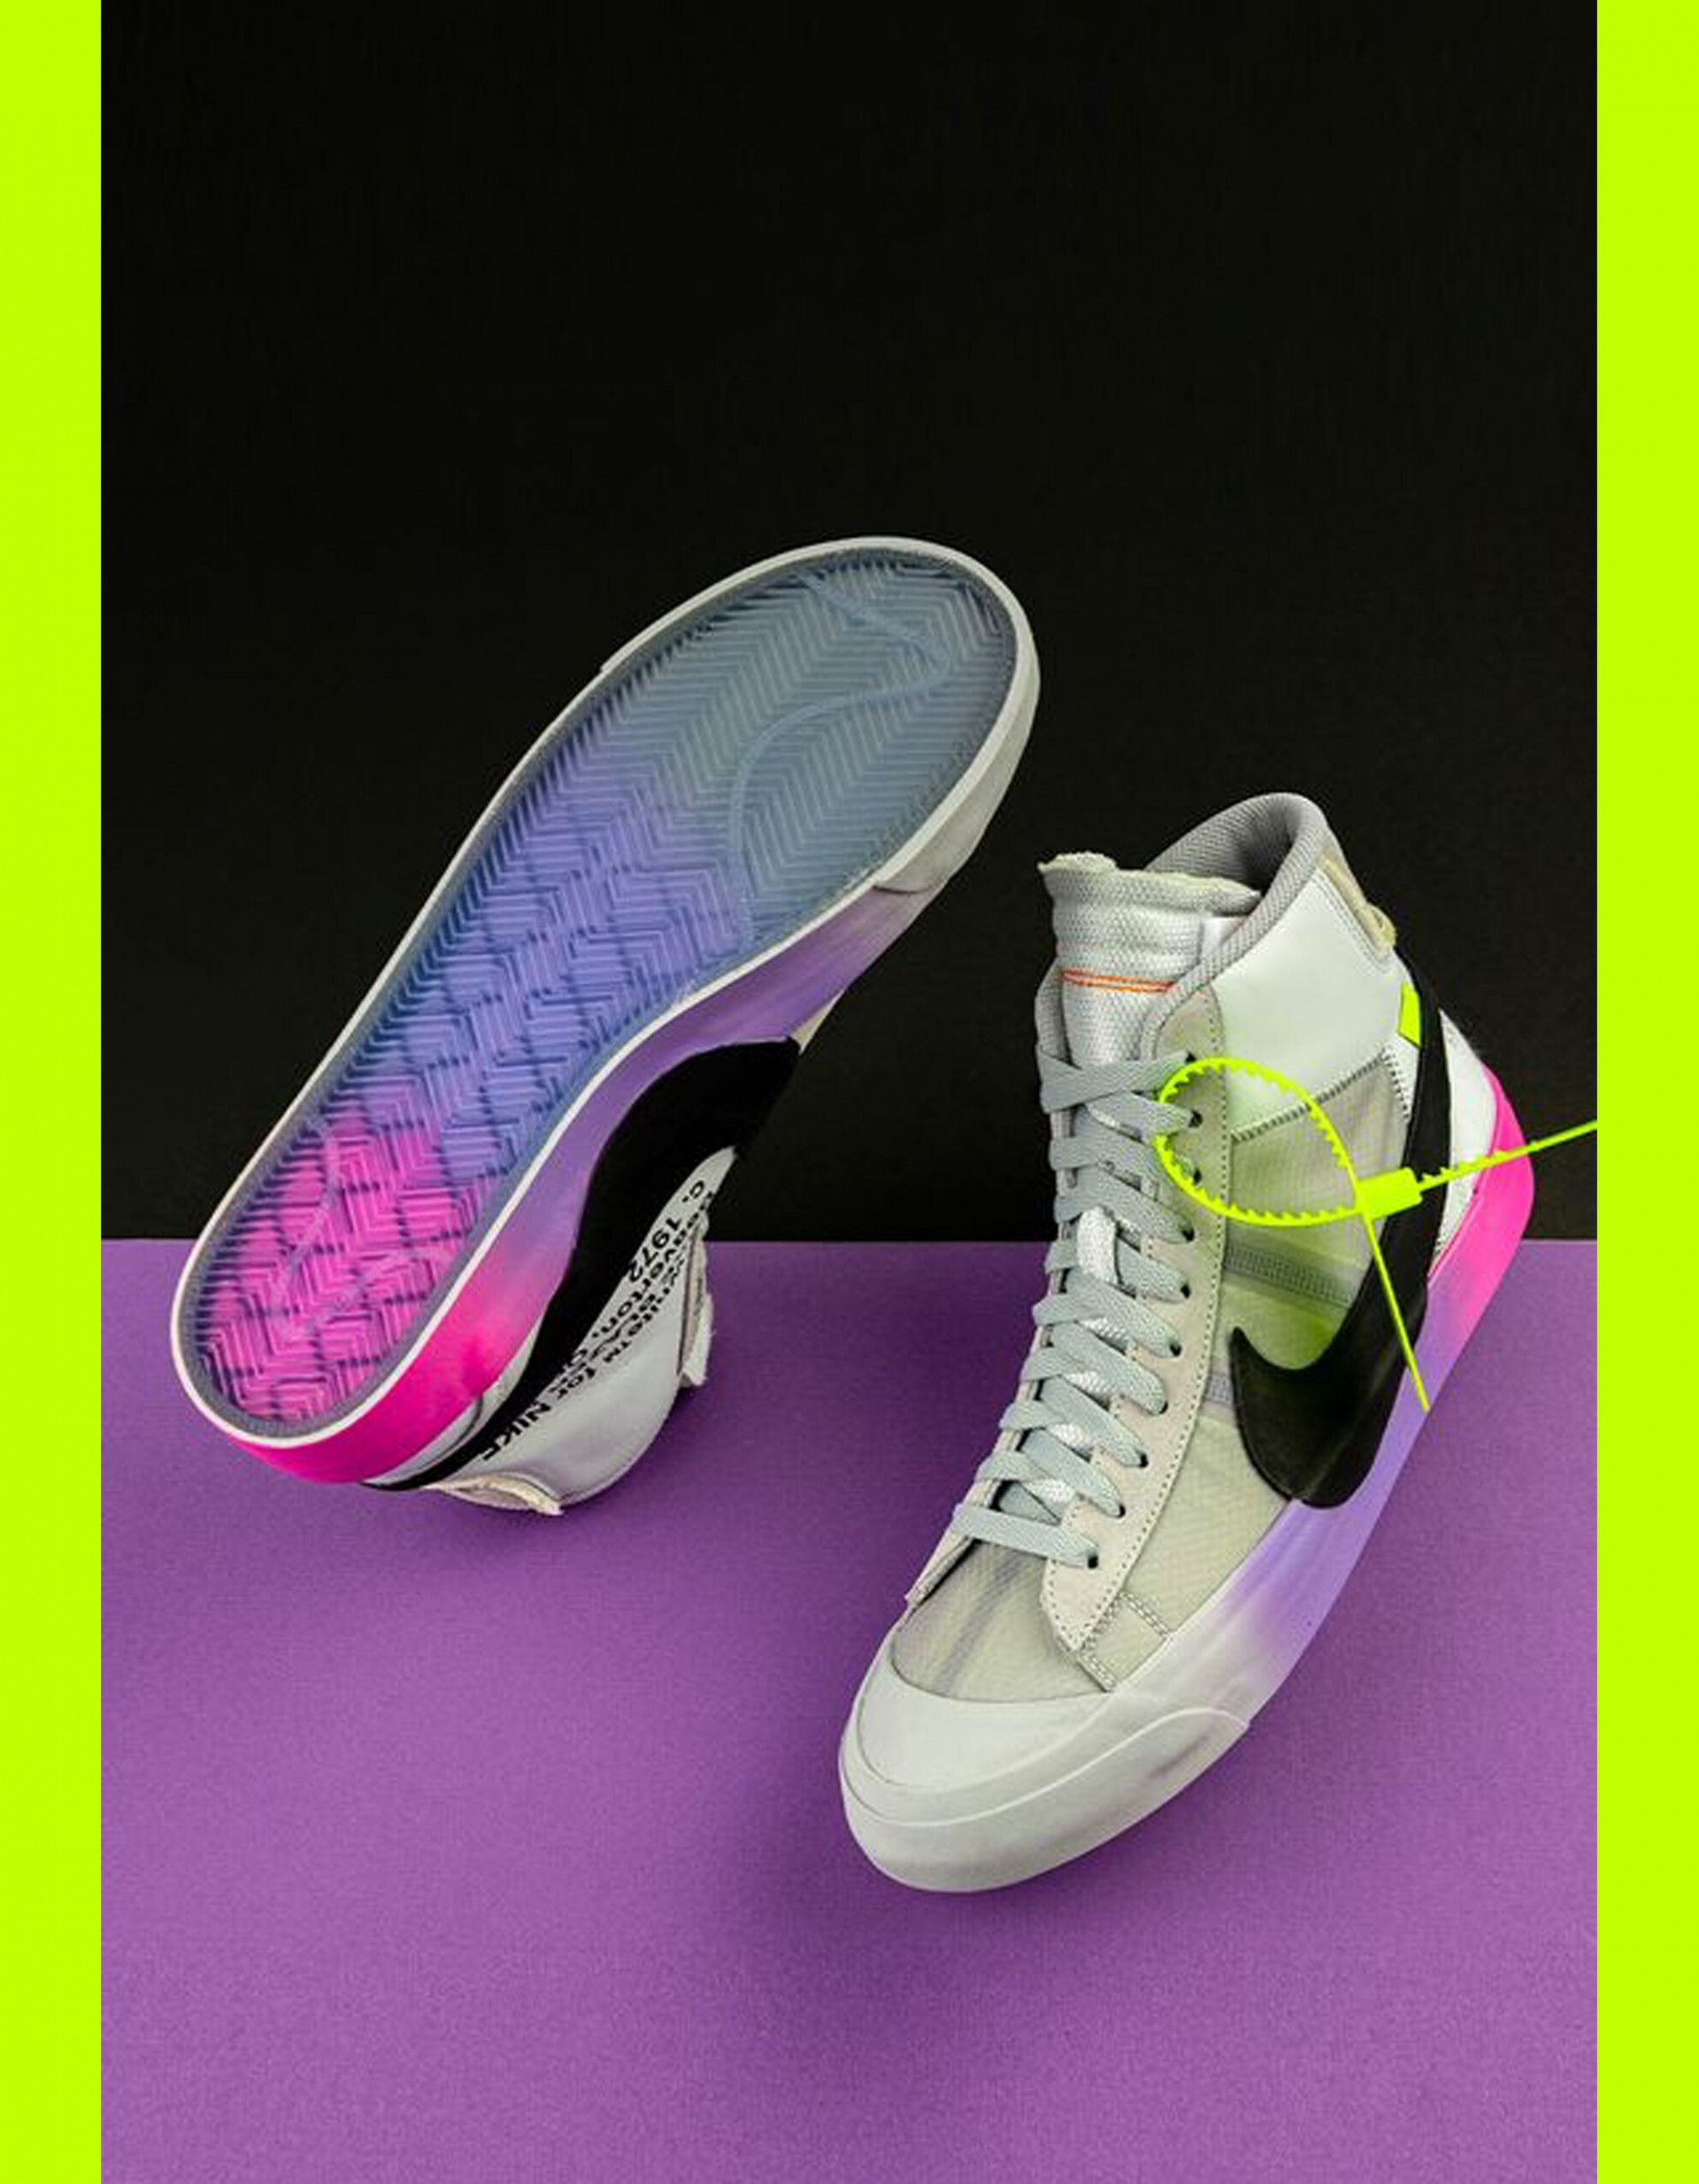 Top 10 Celebrity Sneaker Collaborations - Neon Music - Digital Music  Discovery & Showcase Platform